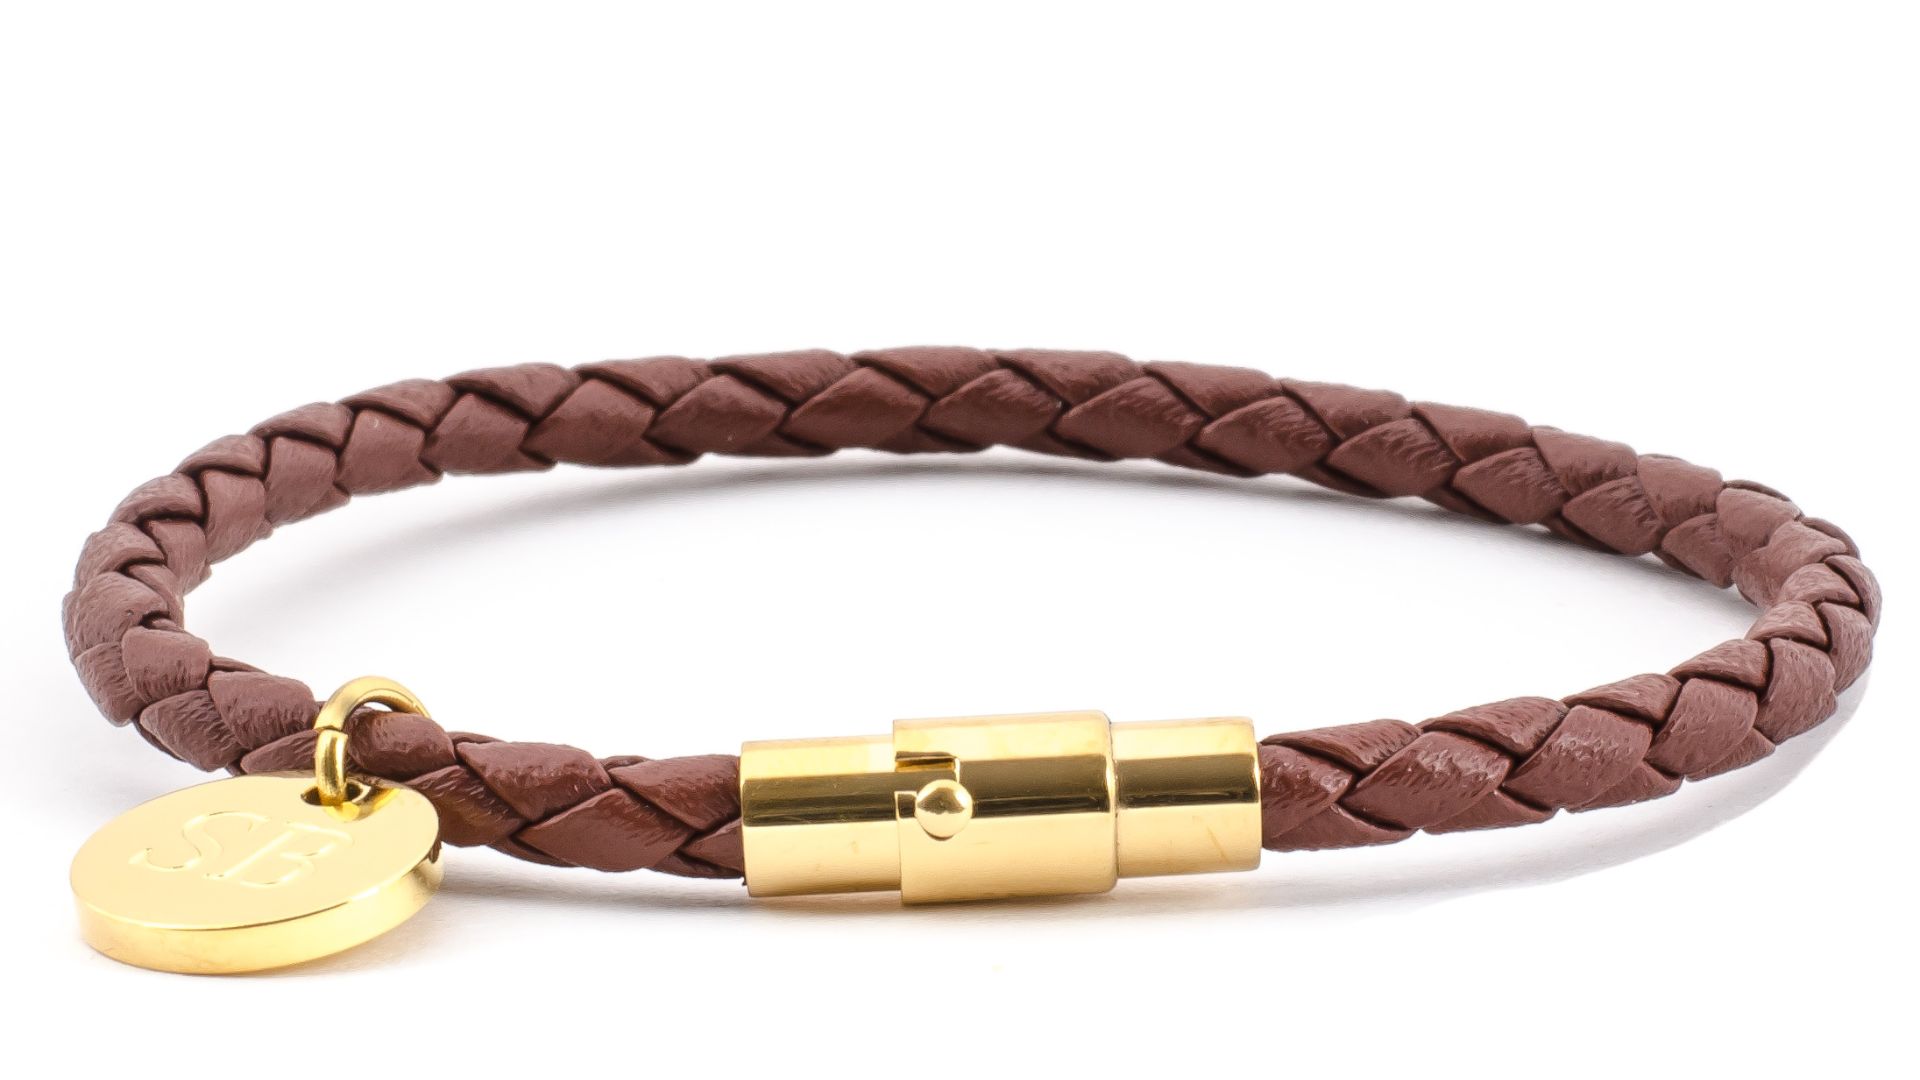 Brown Leather Bracelet - The Timeless Appeal And A Popular Accessory Today